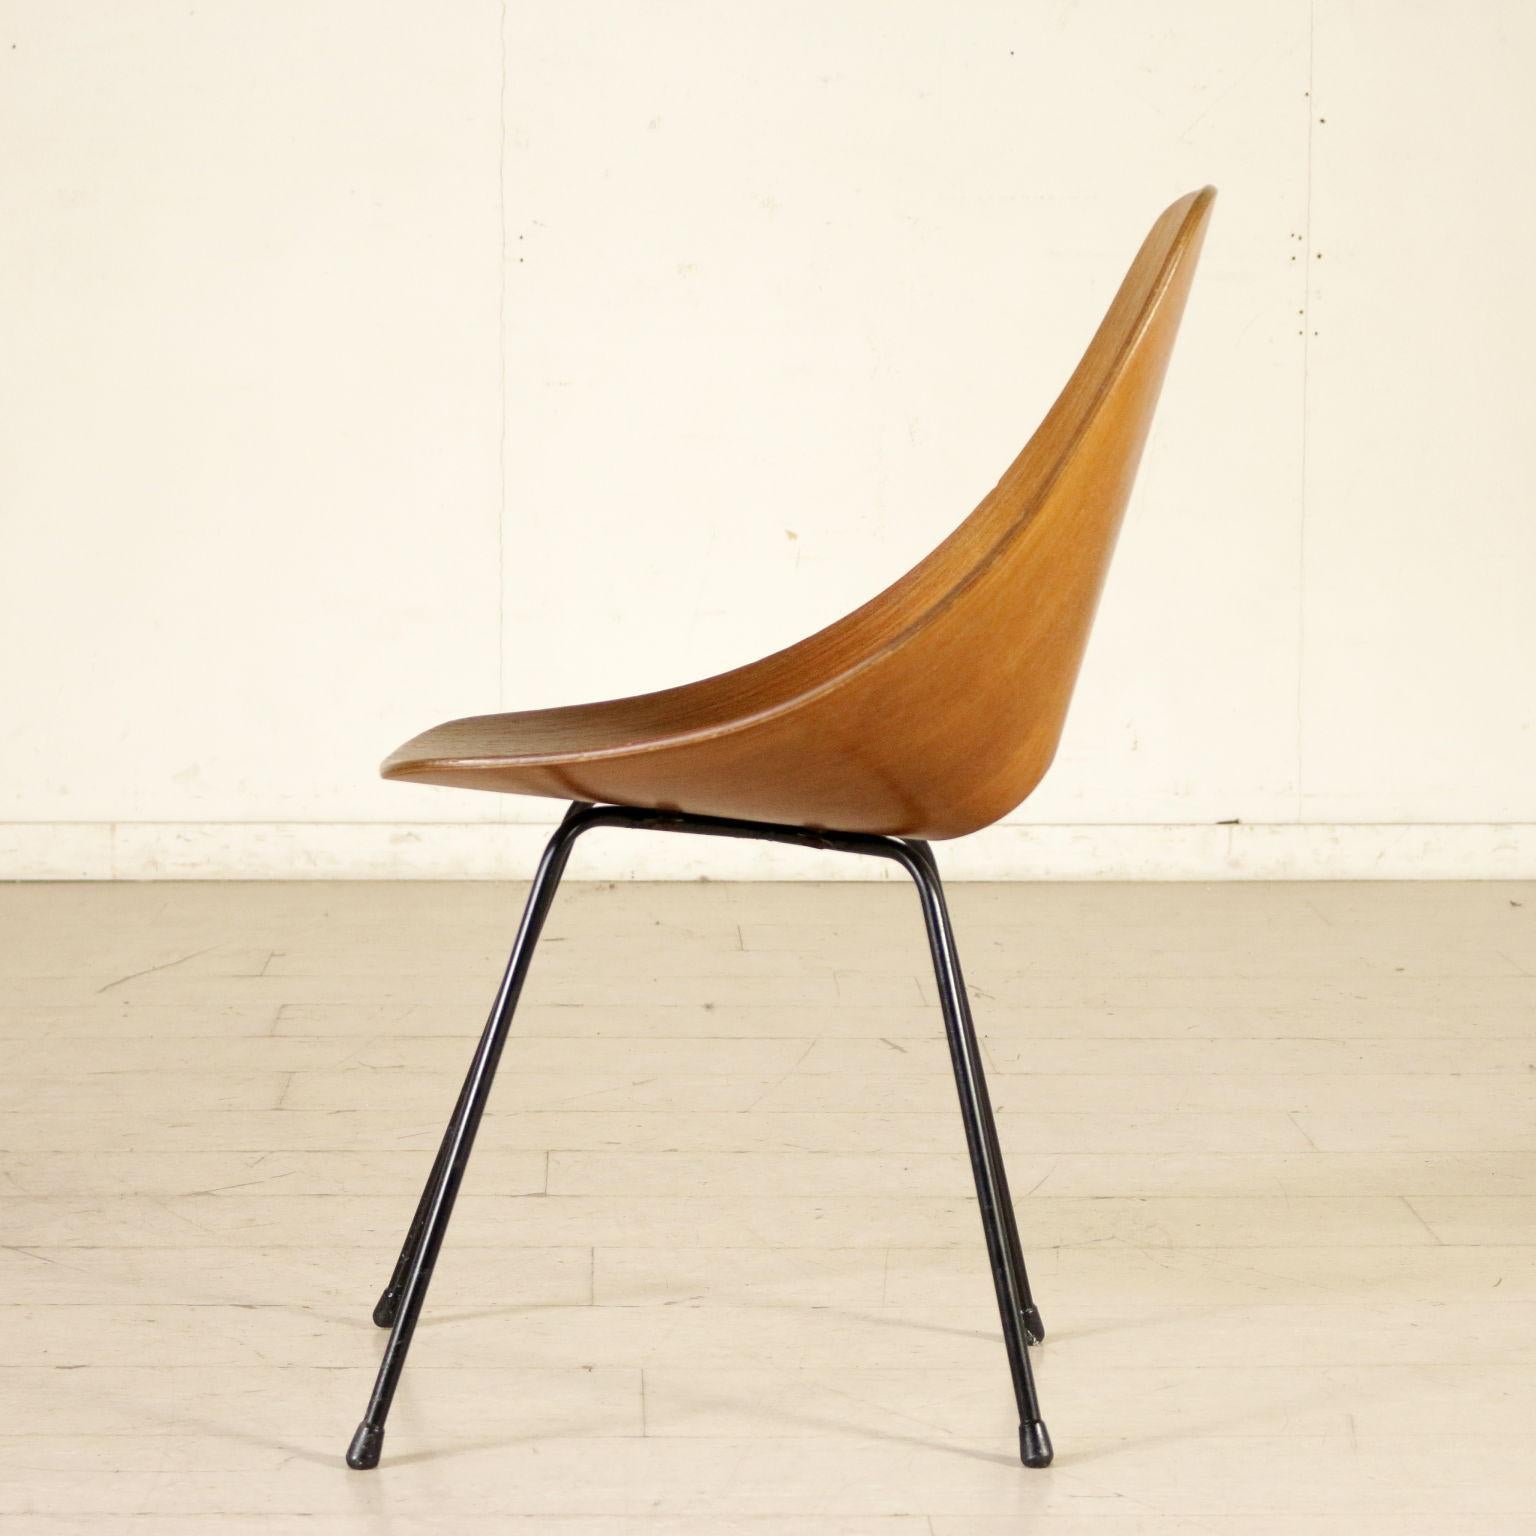 Mid-20th Century Medea Chair by Vittorio Nobili Bent Wood Vintage, Italy, 1950s